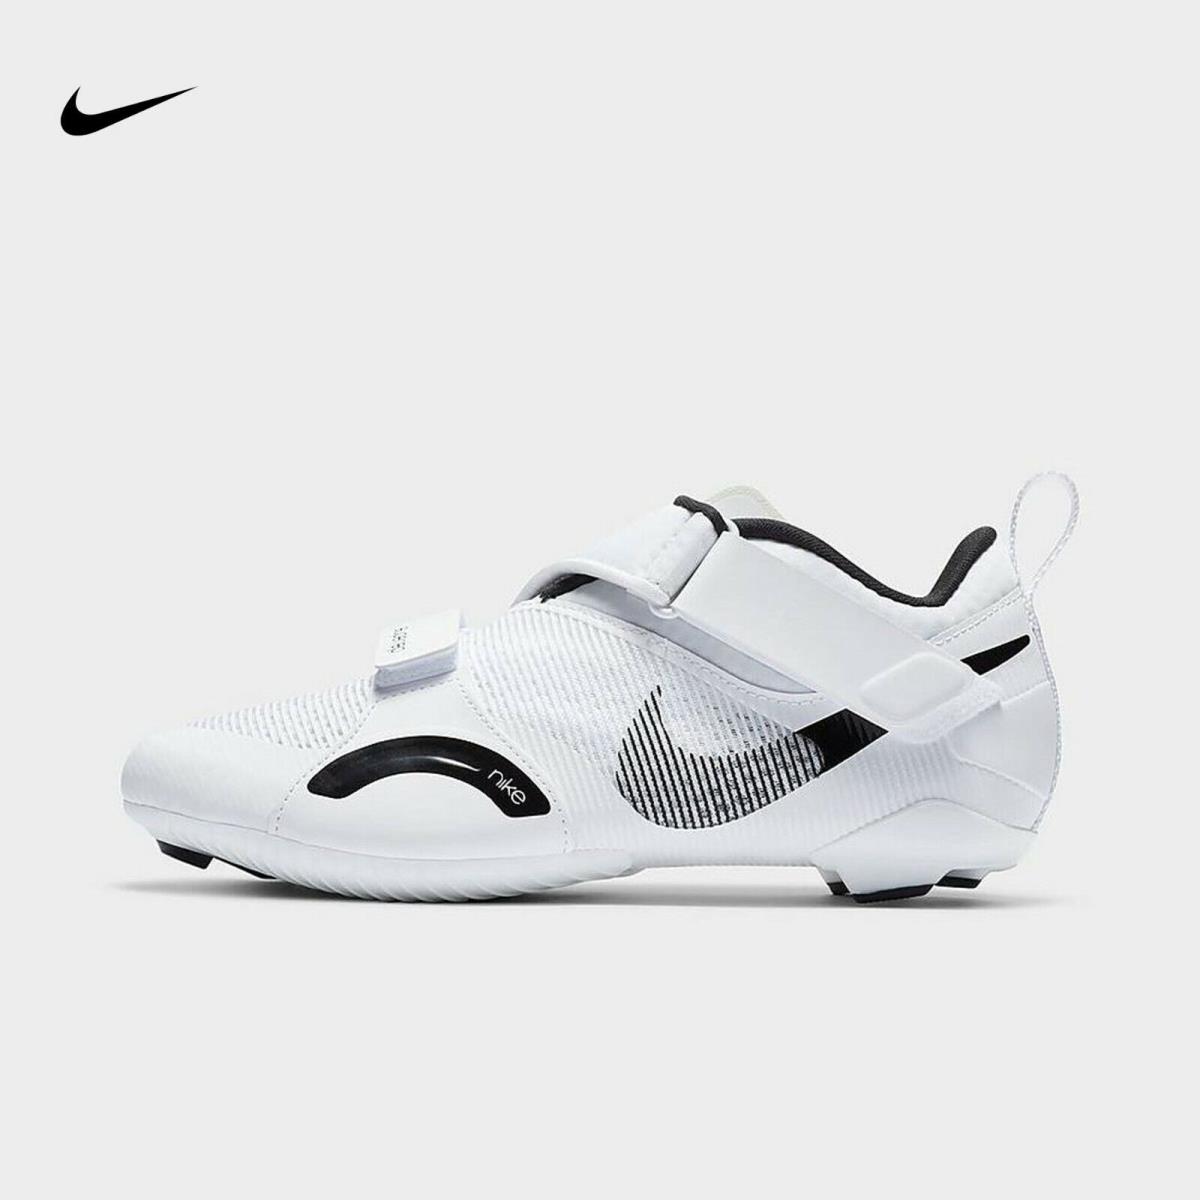 Insatisfecho pase a ver infierno Nike Superrep Indoor Cycling Shoes / White Black CJ0775-100 Women`s Size 8  | 193658629256 - Nike shoes SuperRep - White / Black | SporTipTop